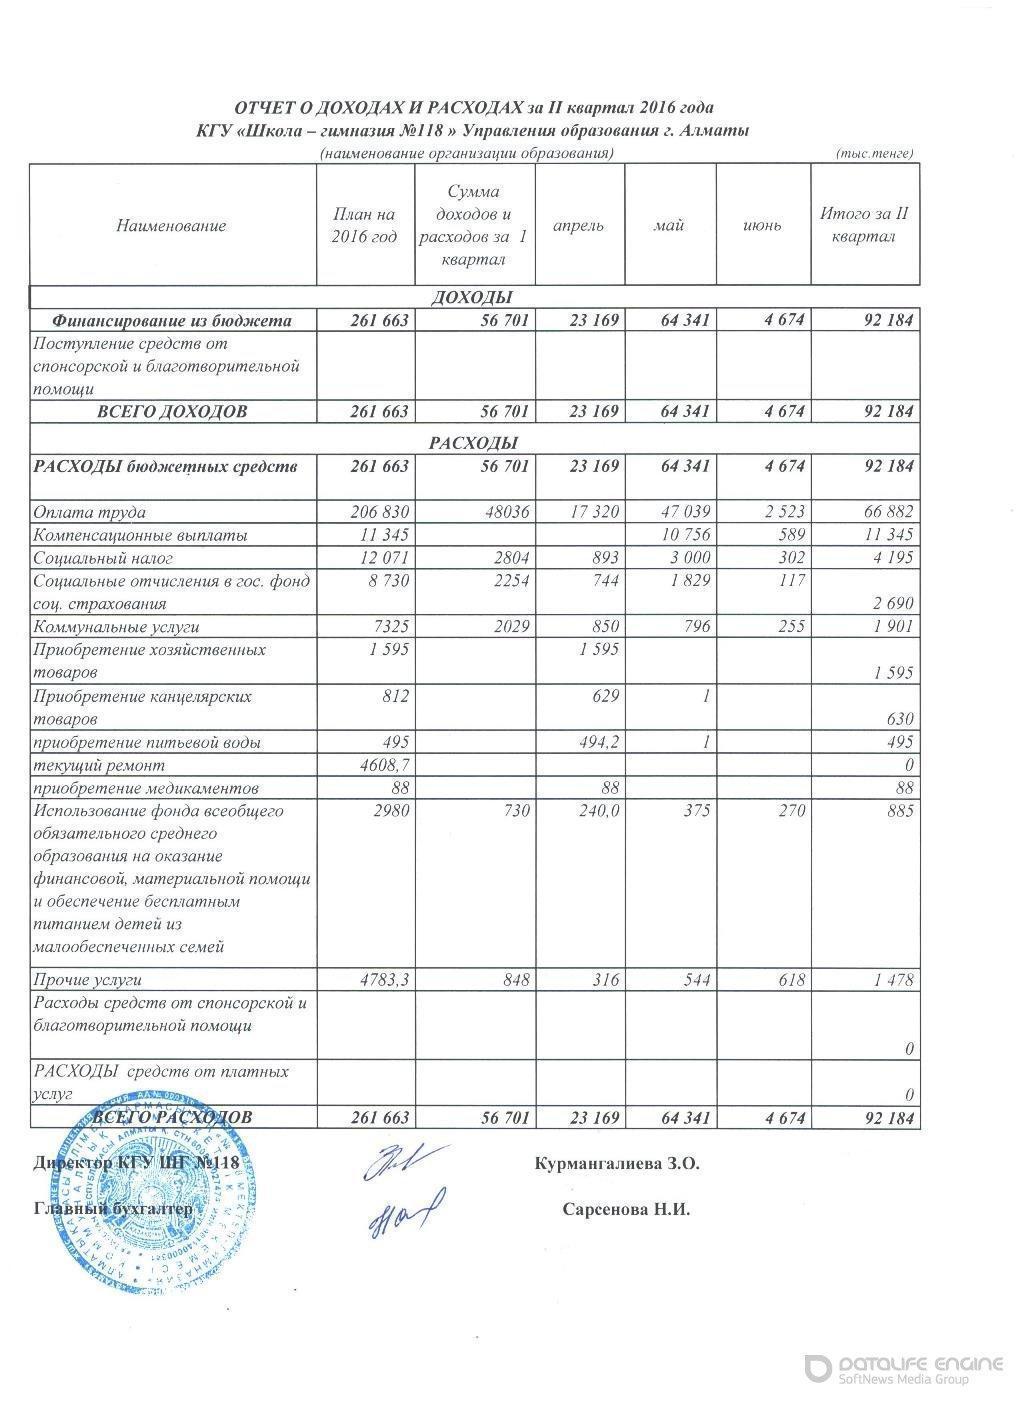 Statement of income and expenses за II квартал 2016 года